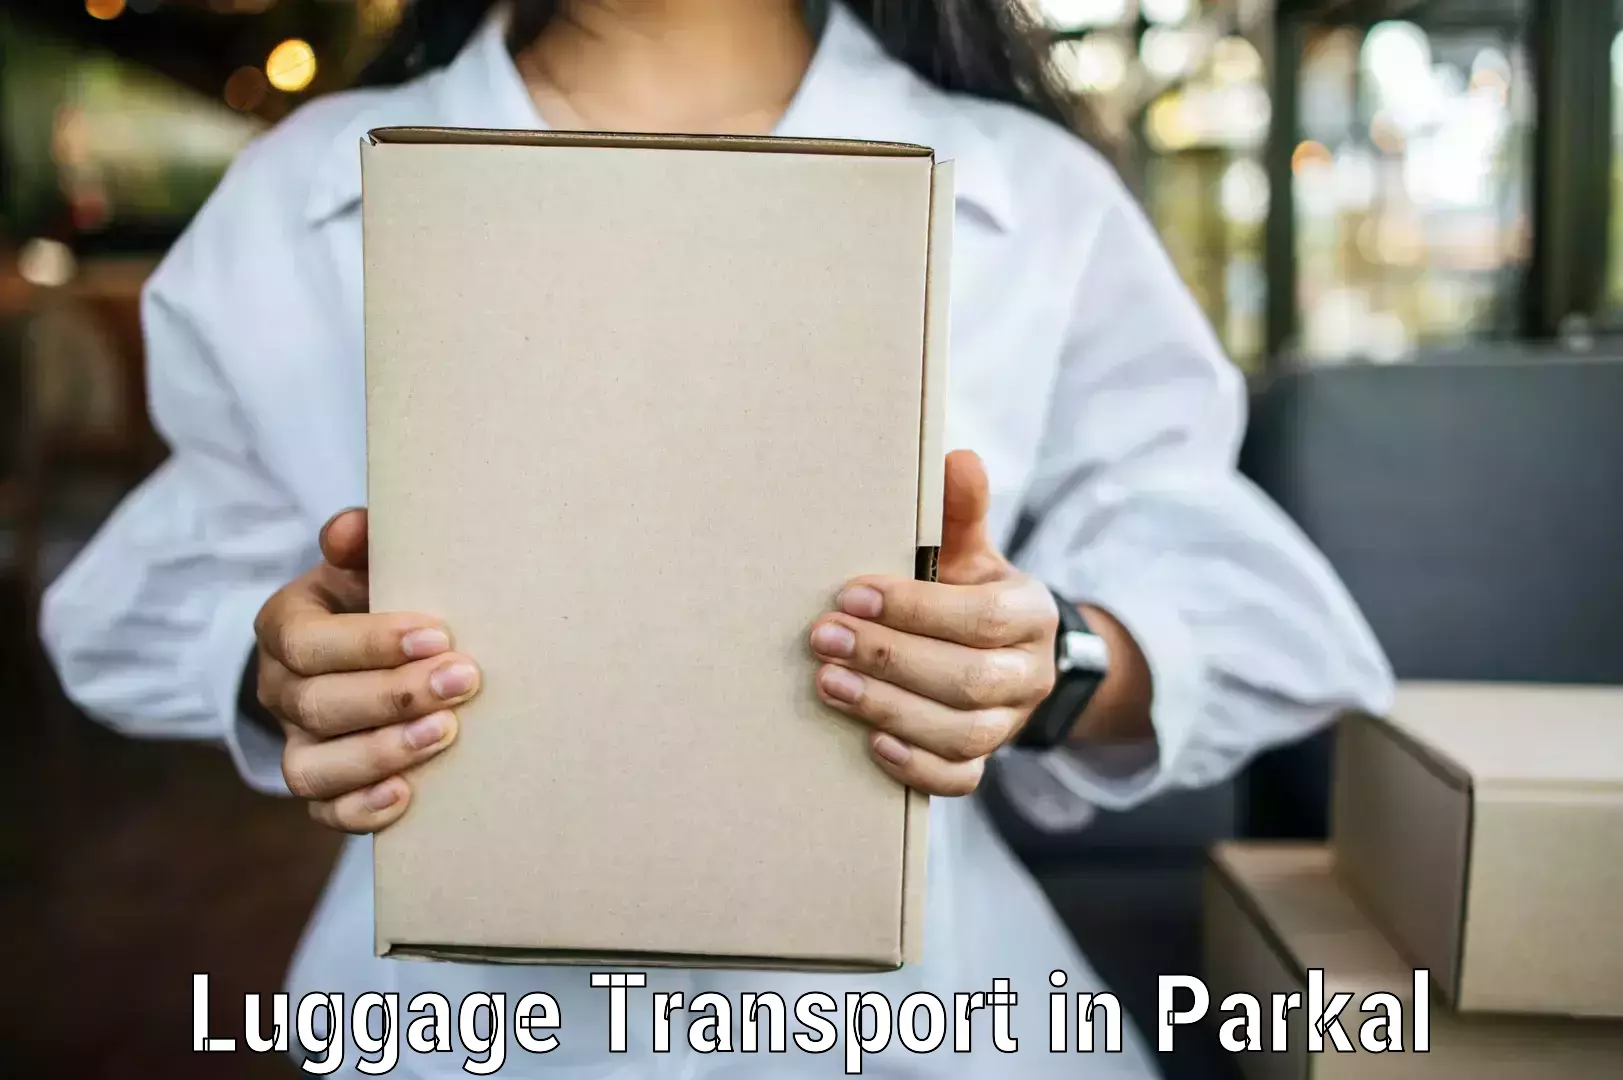 Baggage relocation service in Parkal